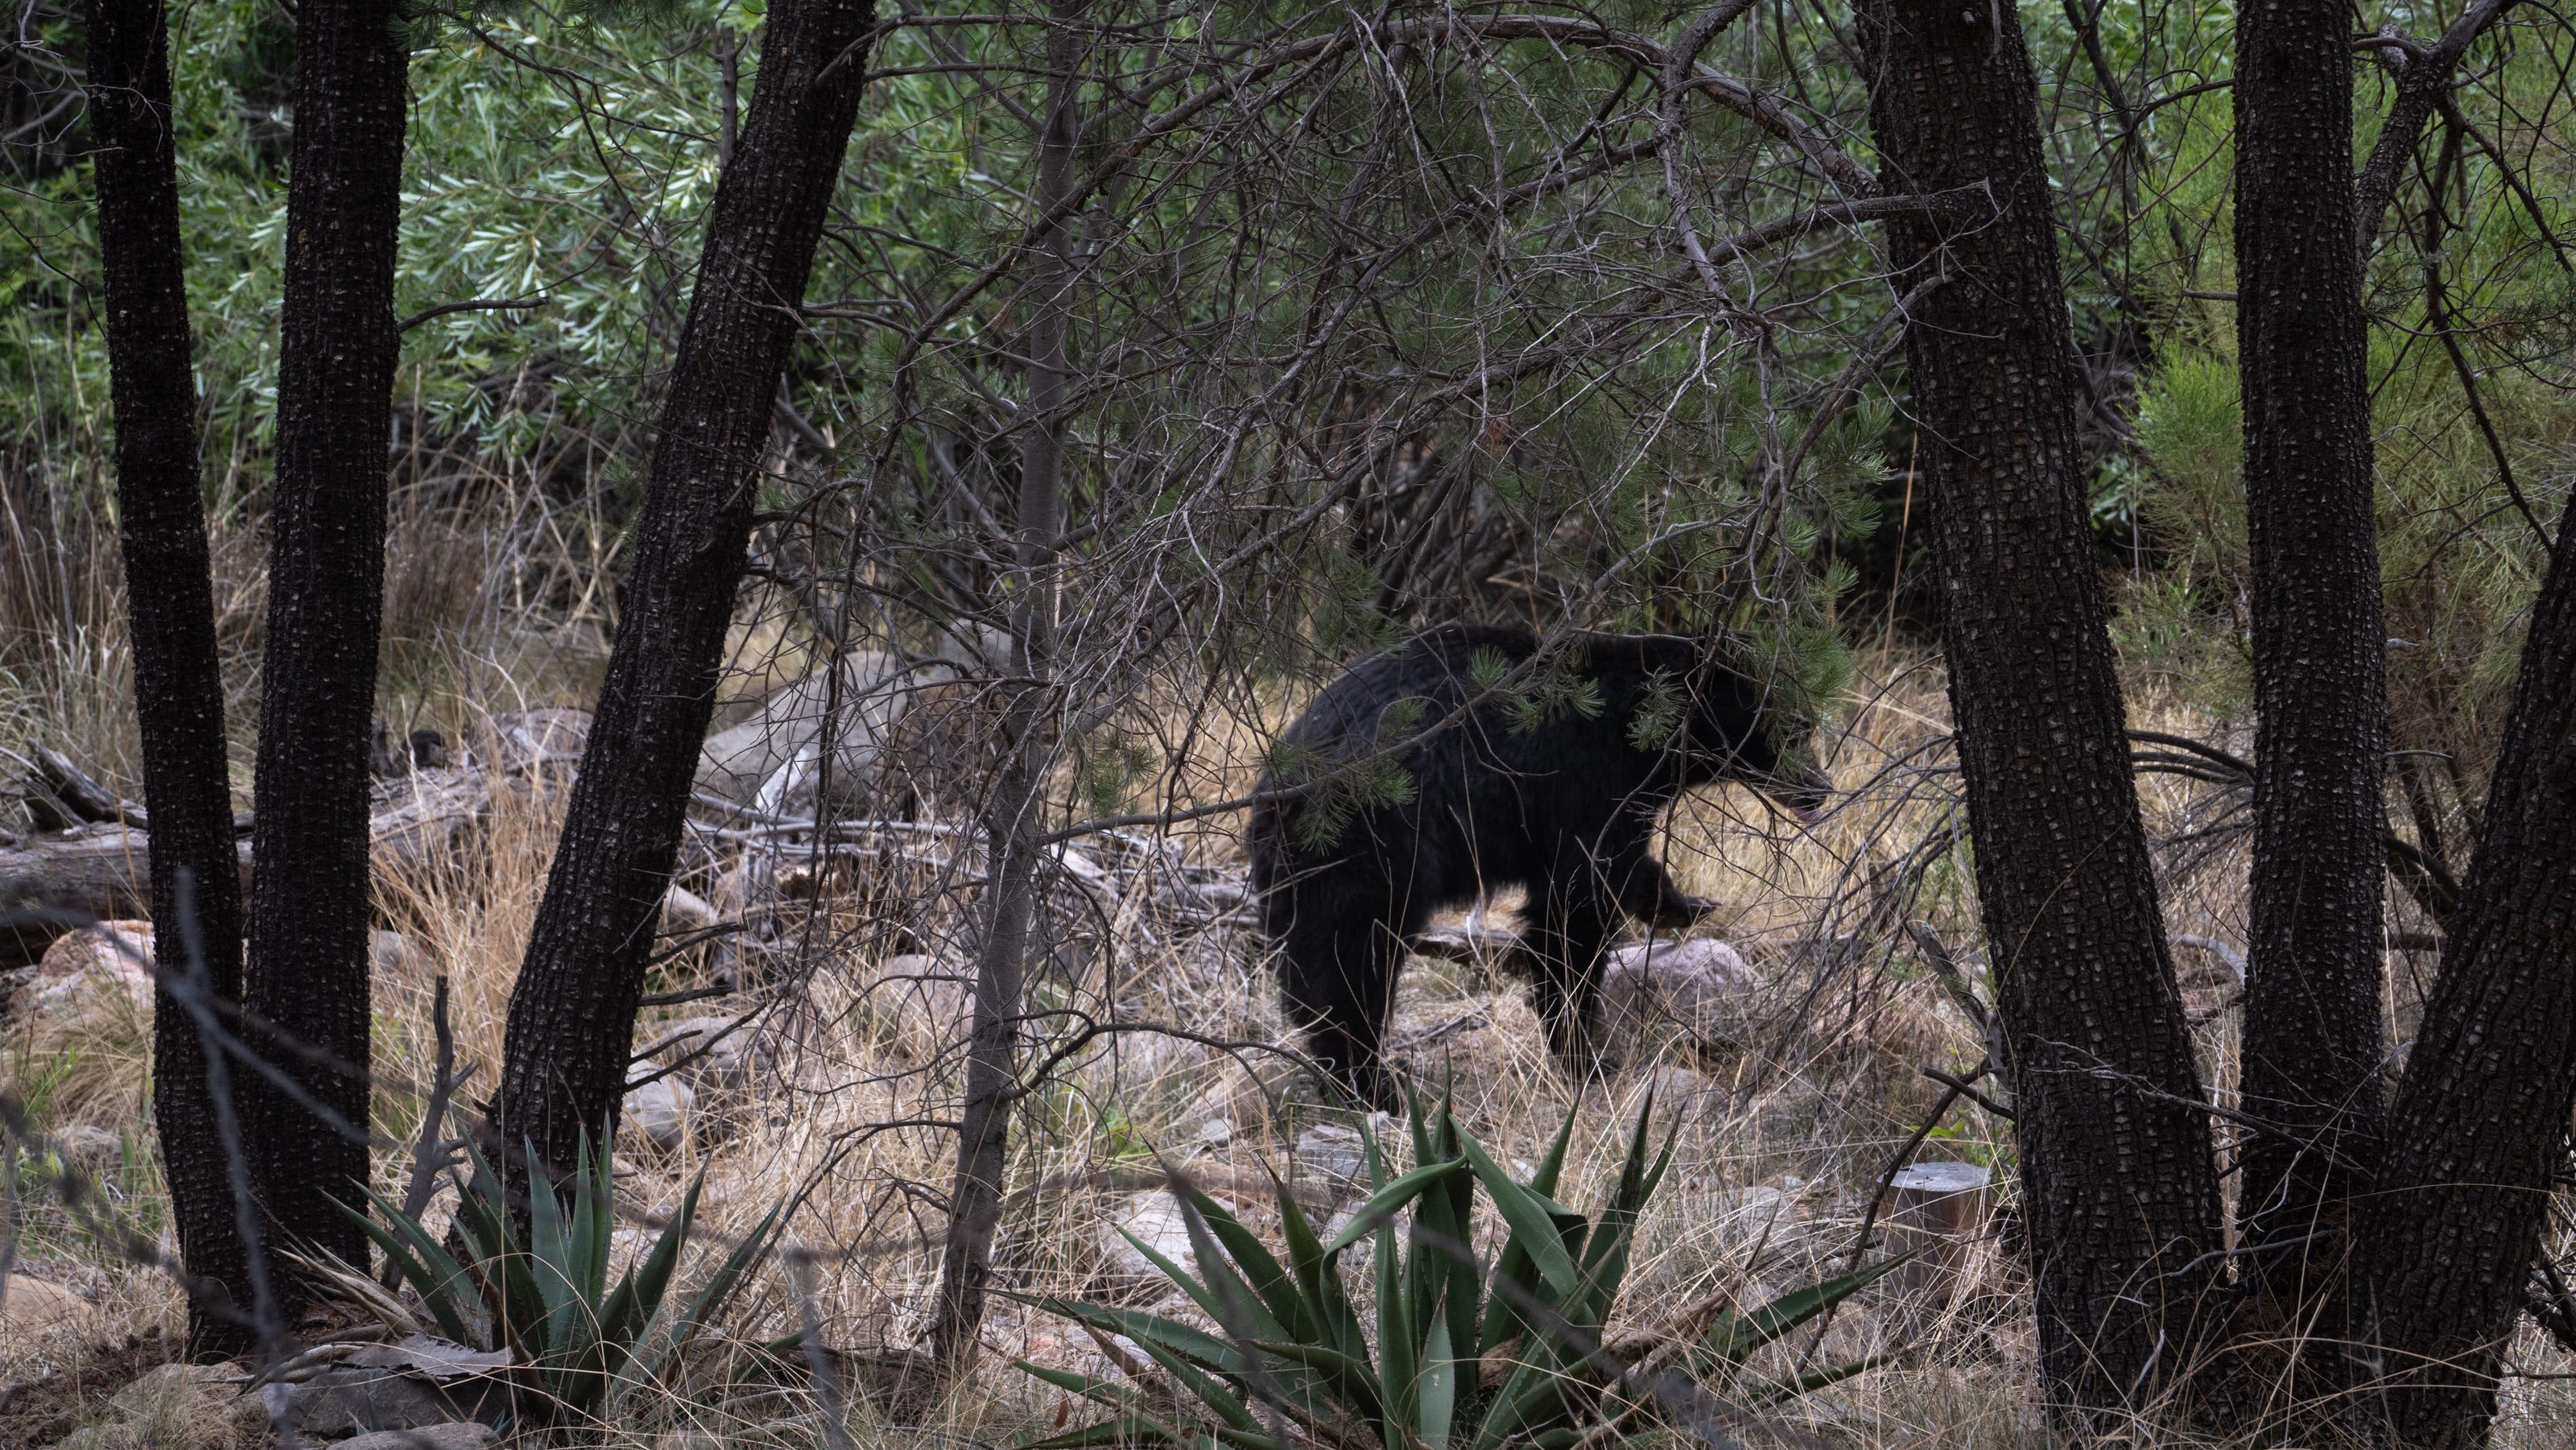 Bear put down after it entered a cabin and attacked a 15-year-old boy in Arizona